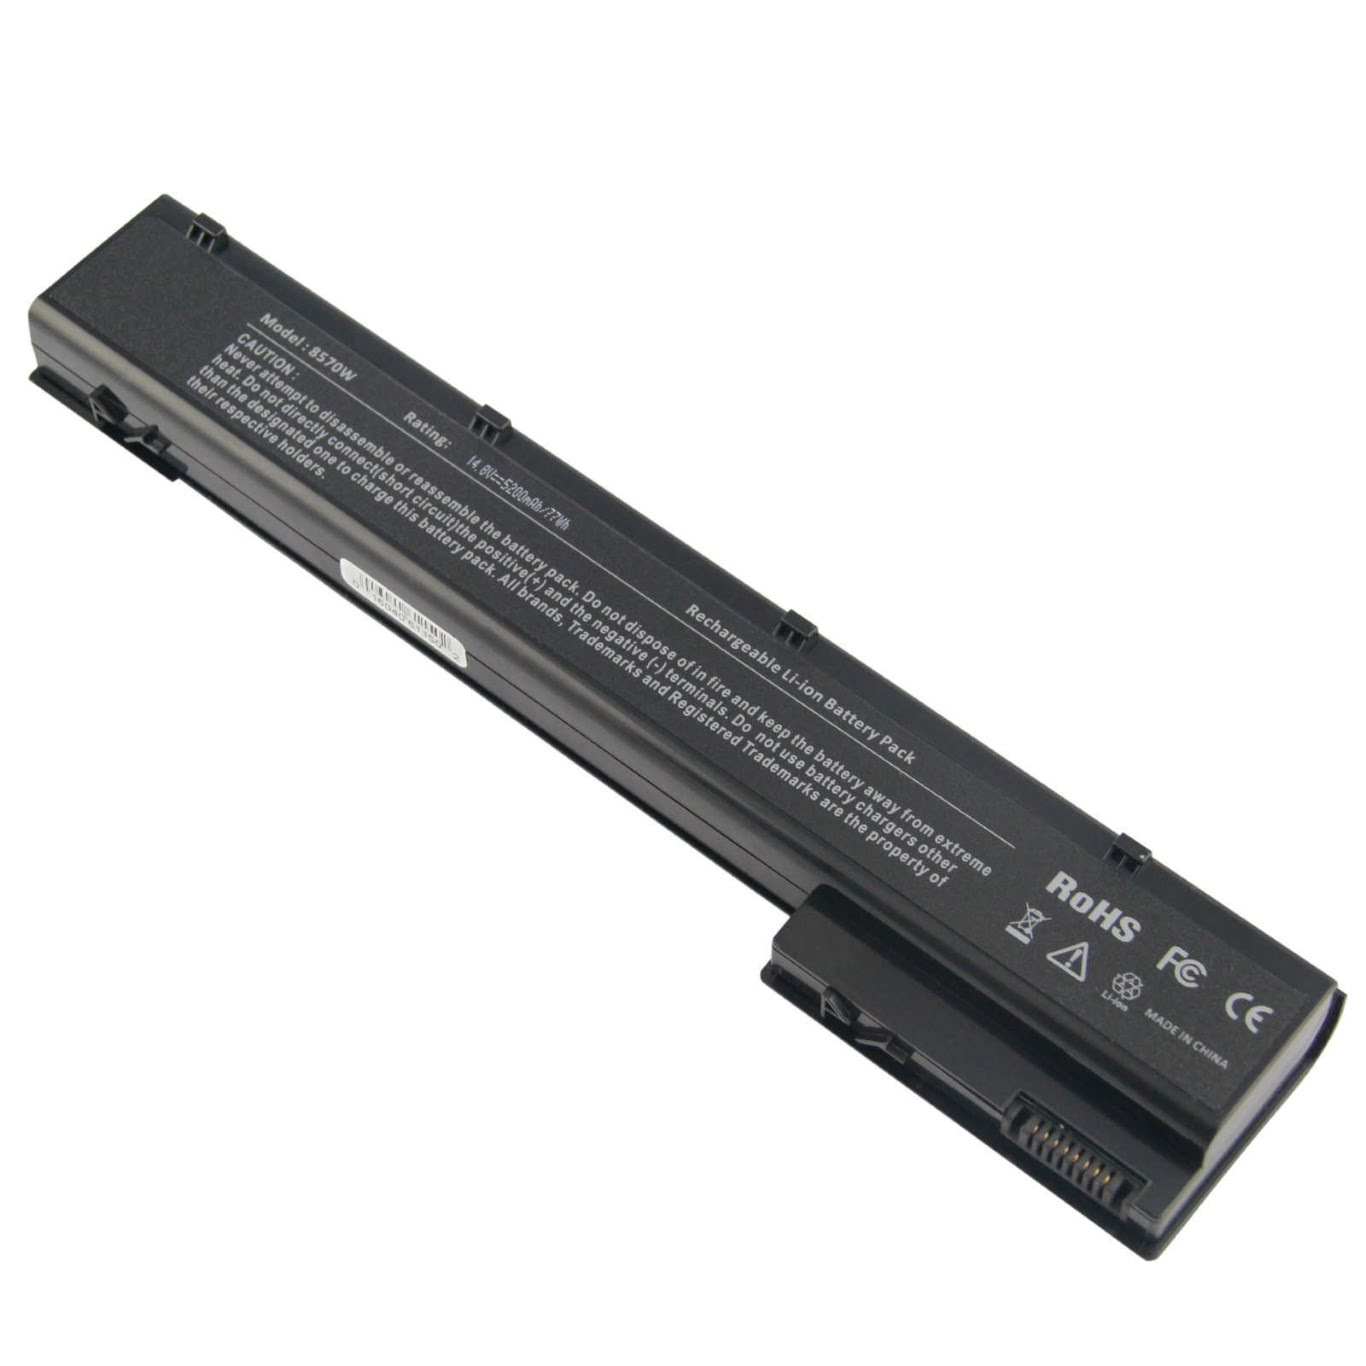 632113-151, 632425-001 replacement Laptop Battery for HP EliteBook 8560w Mobile Workstation, EliteBook 8570w Mobile Workstation, 14.8V, 5200mAh, 8 cells